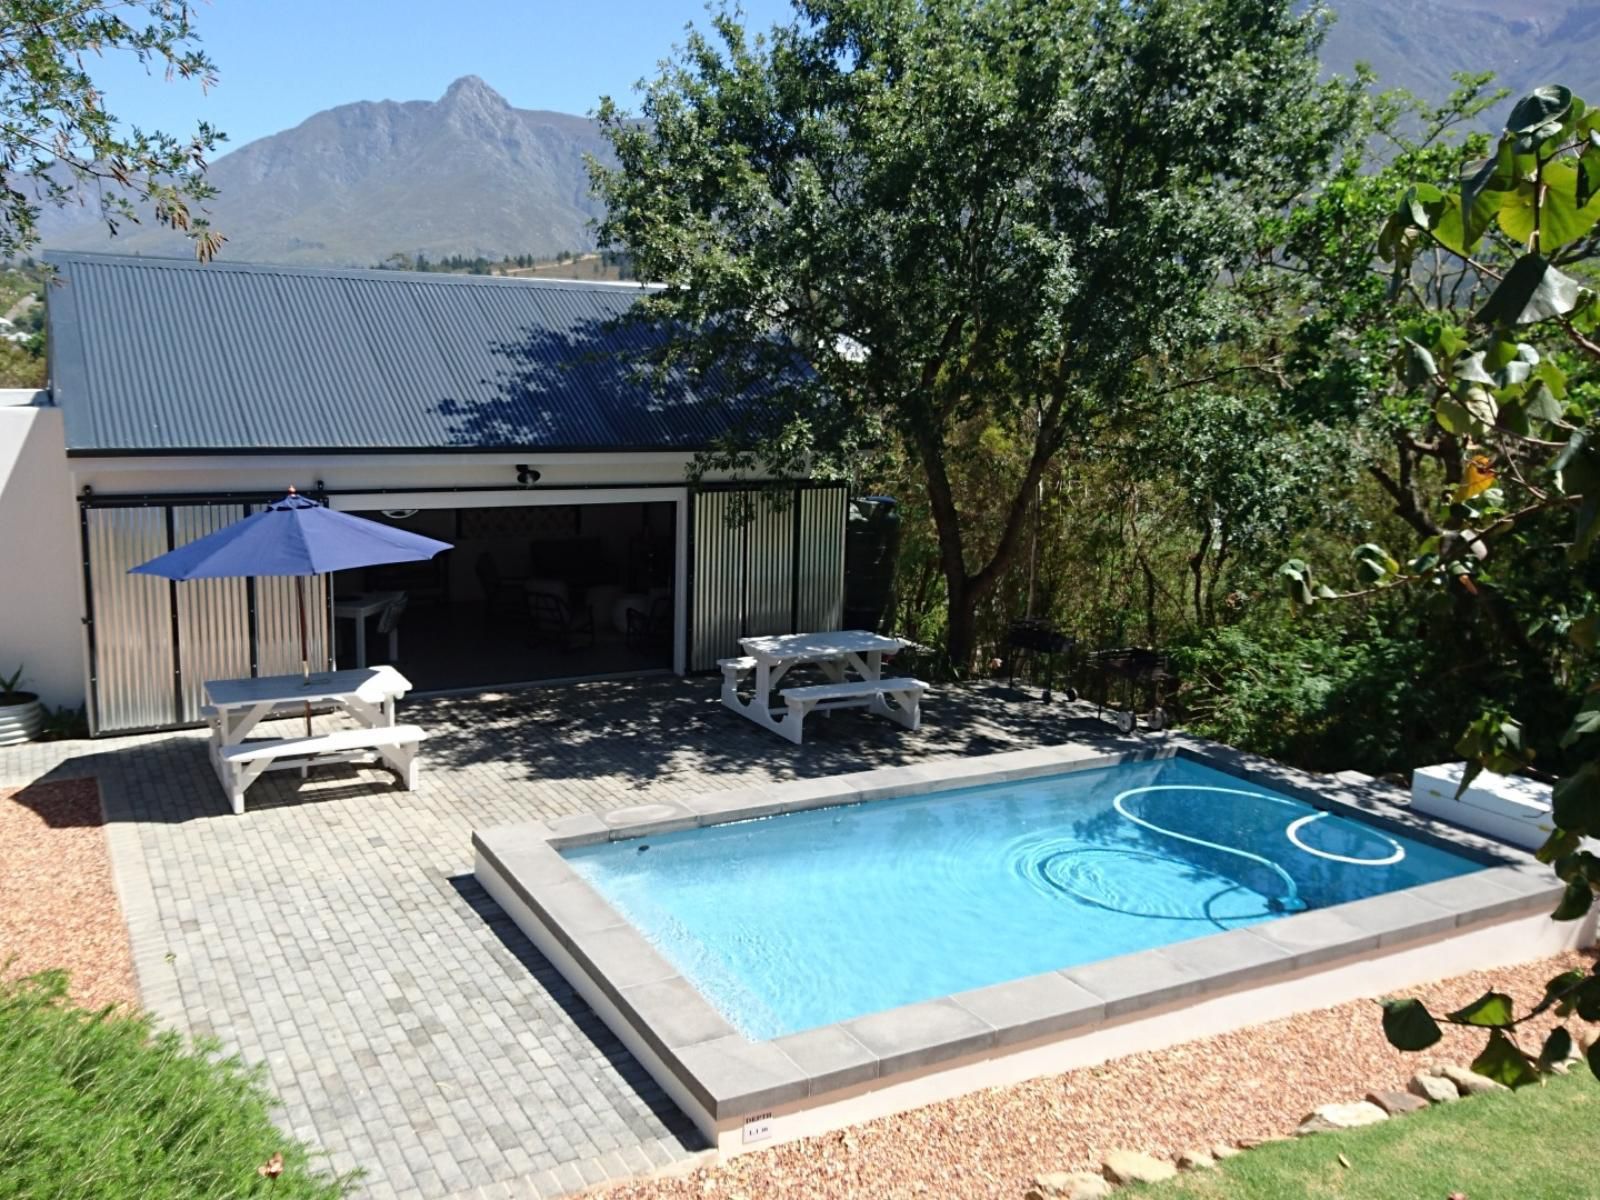 Mountain View Swellendam Swellendam Western Cape South Africa Mountain, Nature, Swimming Pool